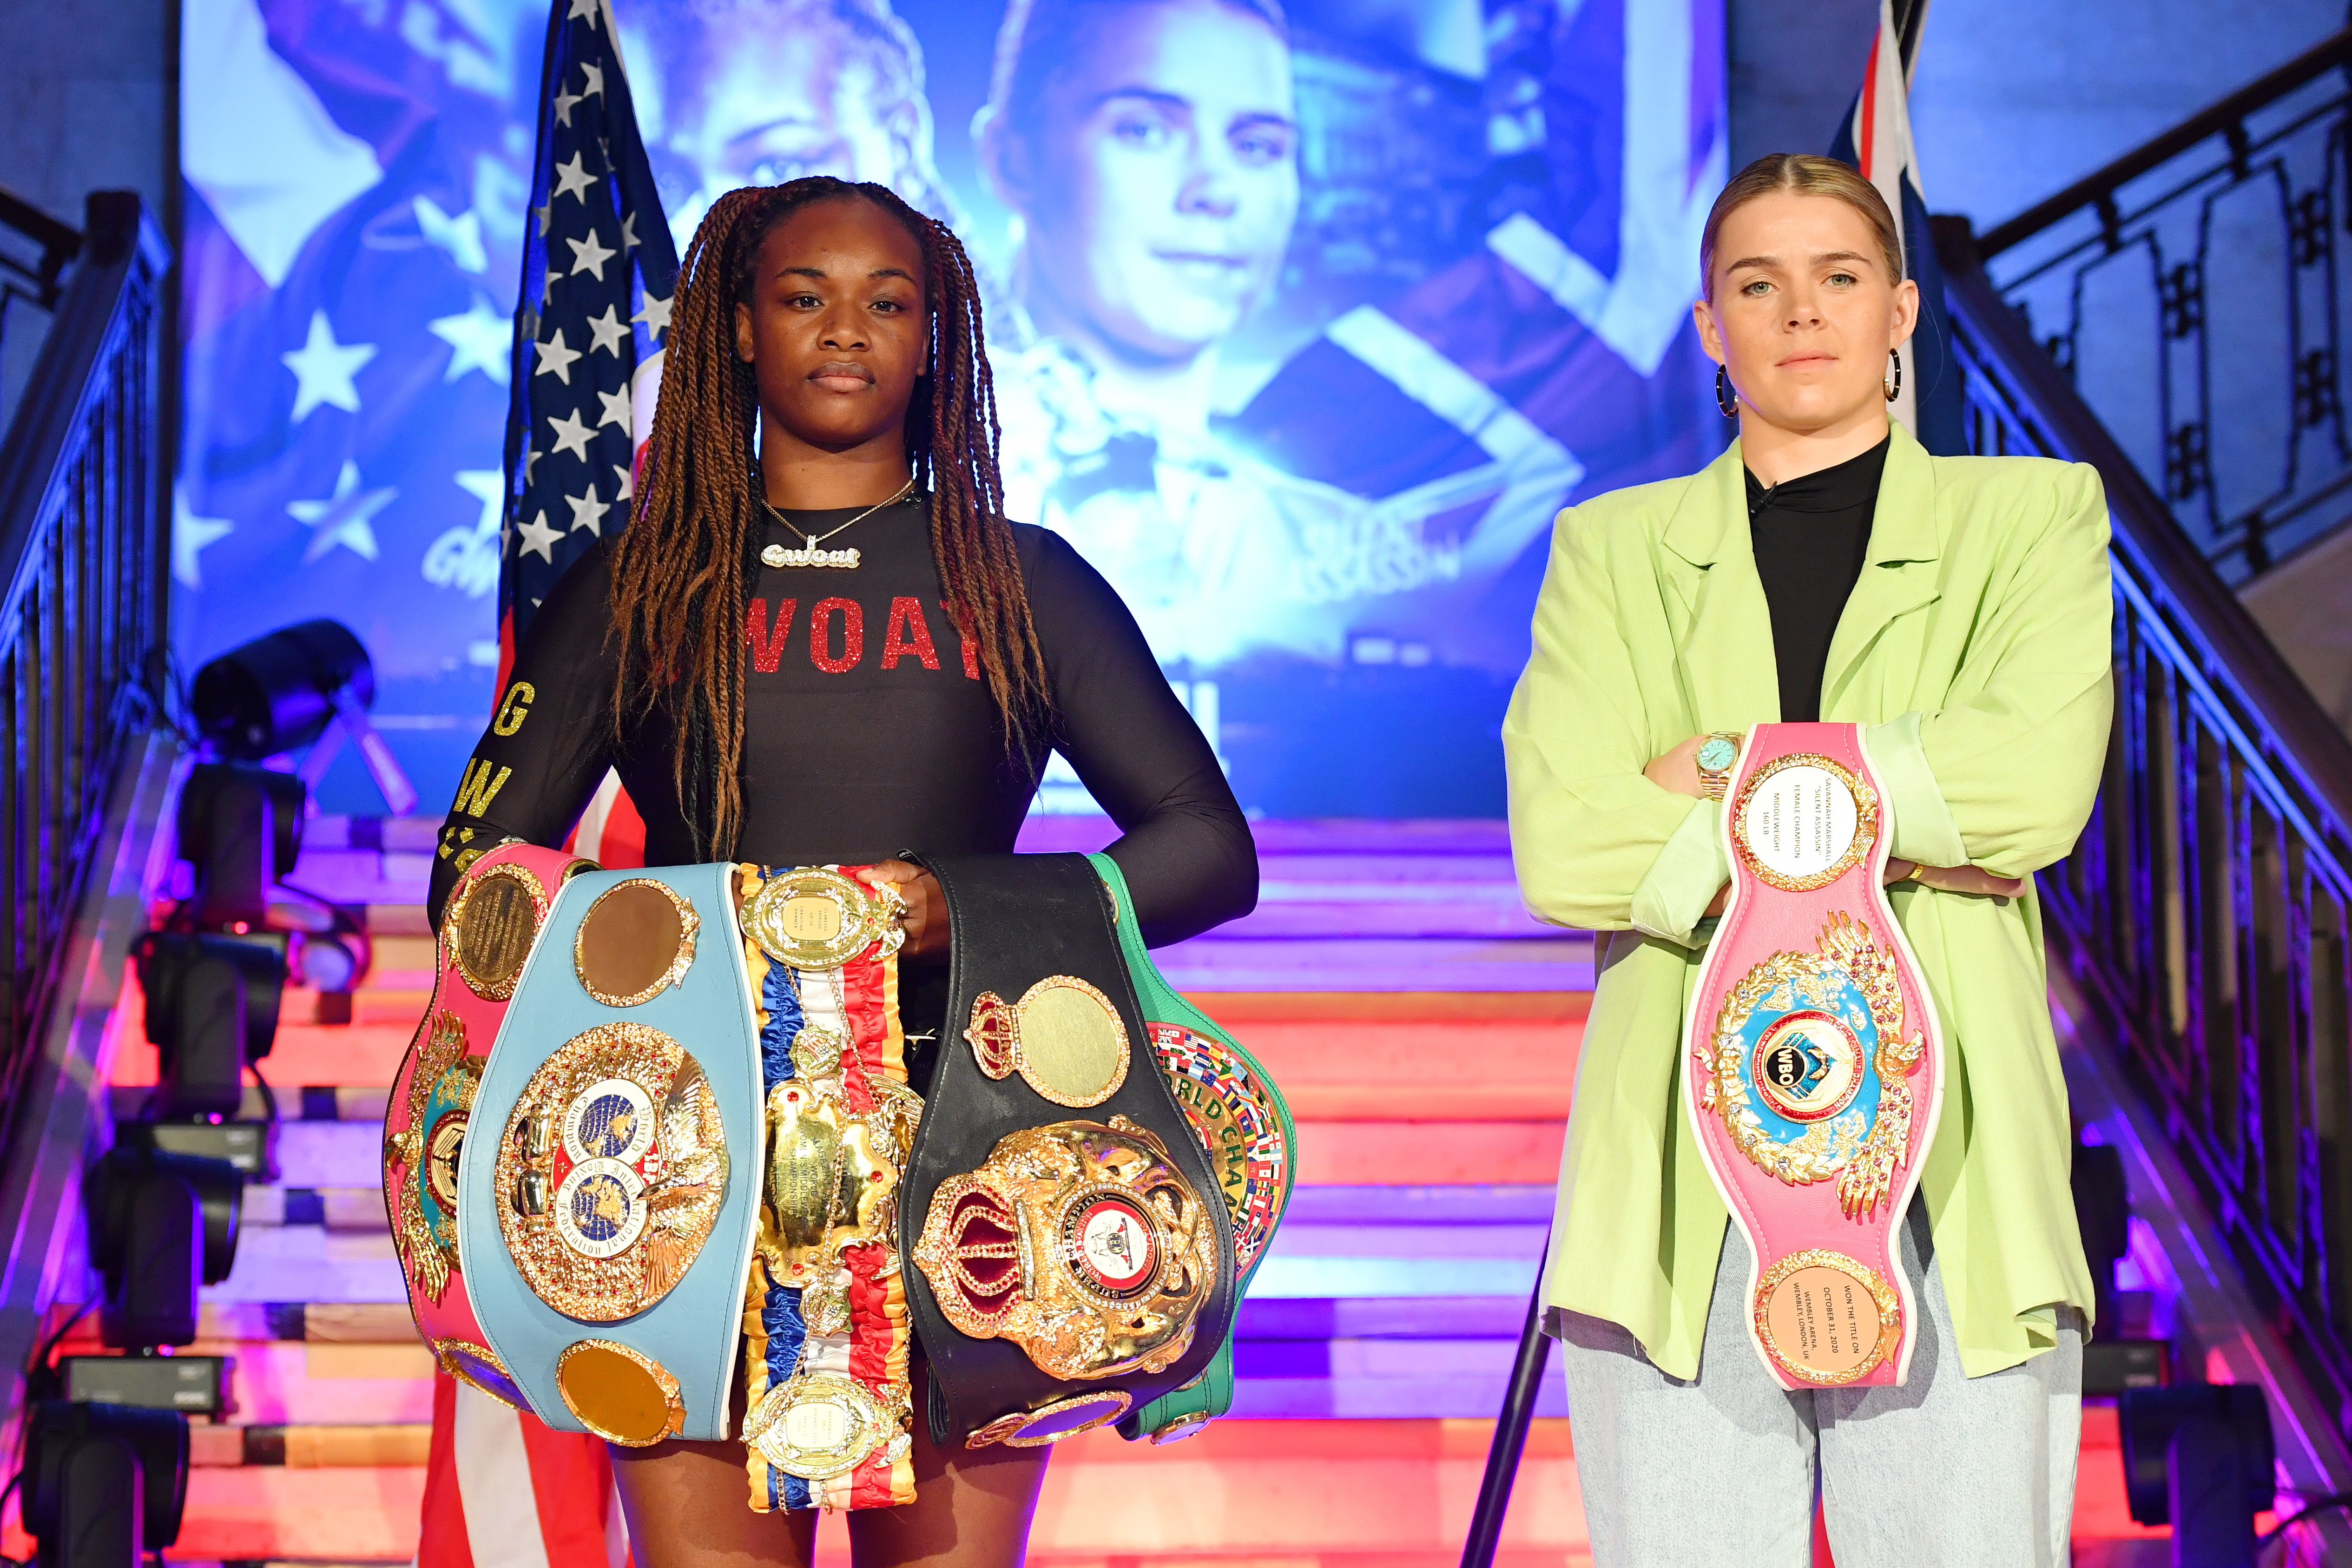 Claressa Shields vs Savannah Marshall is the must-see fight of the weekend